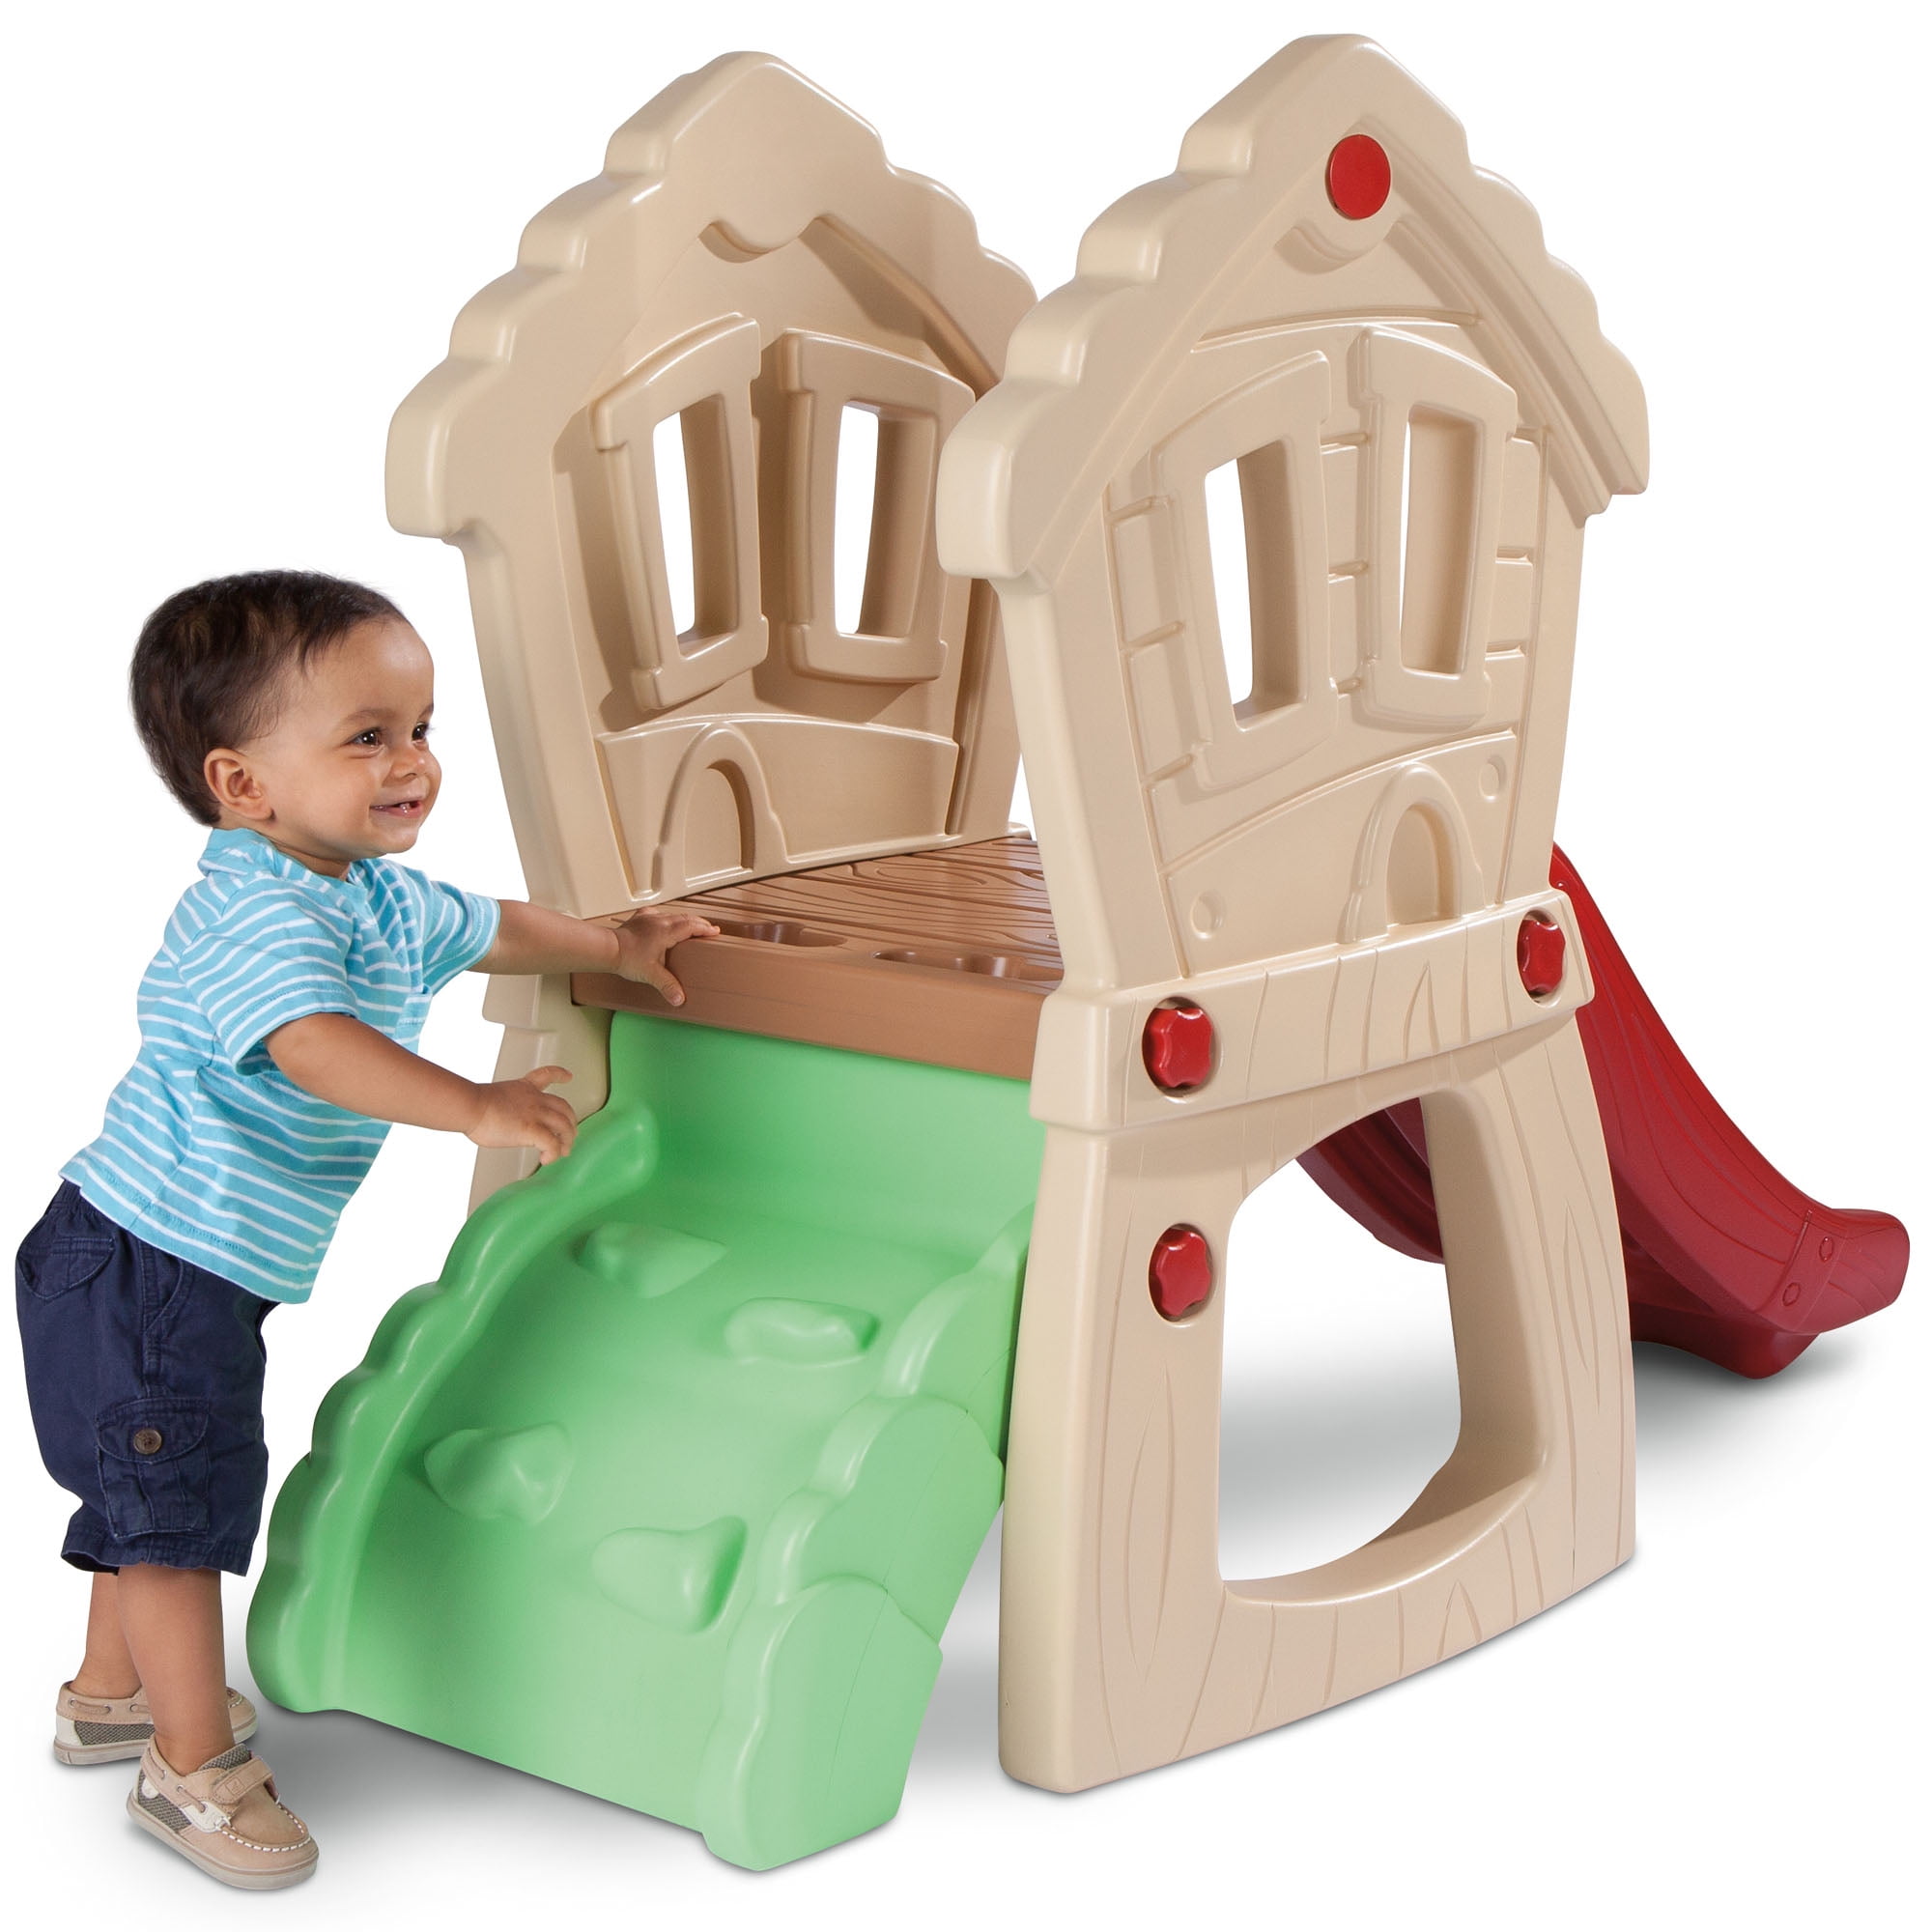 Little Tikes Hide & Seek Climber, Indoor Outdoor Slide and Climbing Playset for Kids Ages 2-5 - 2